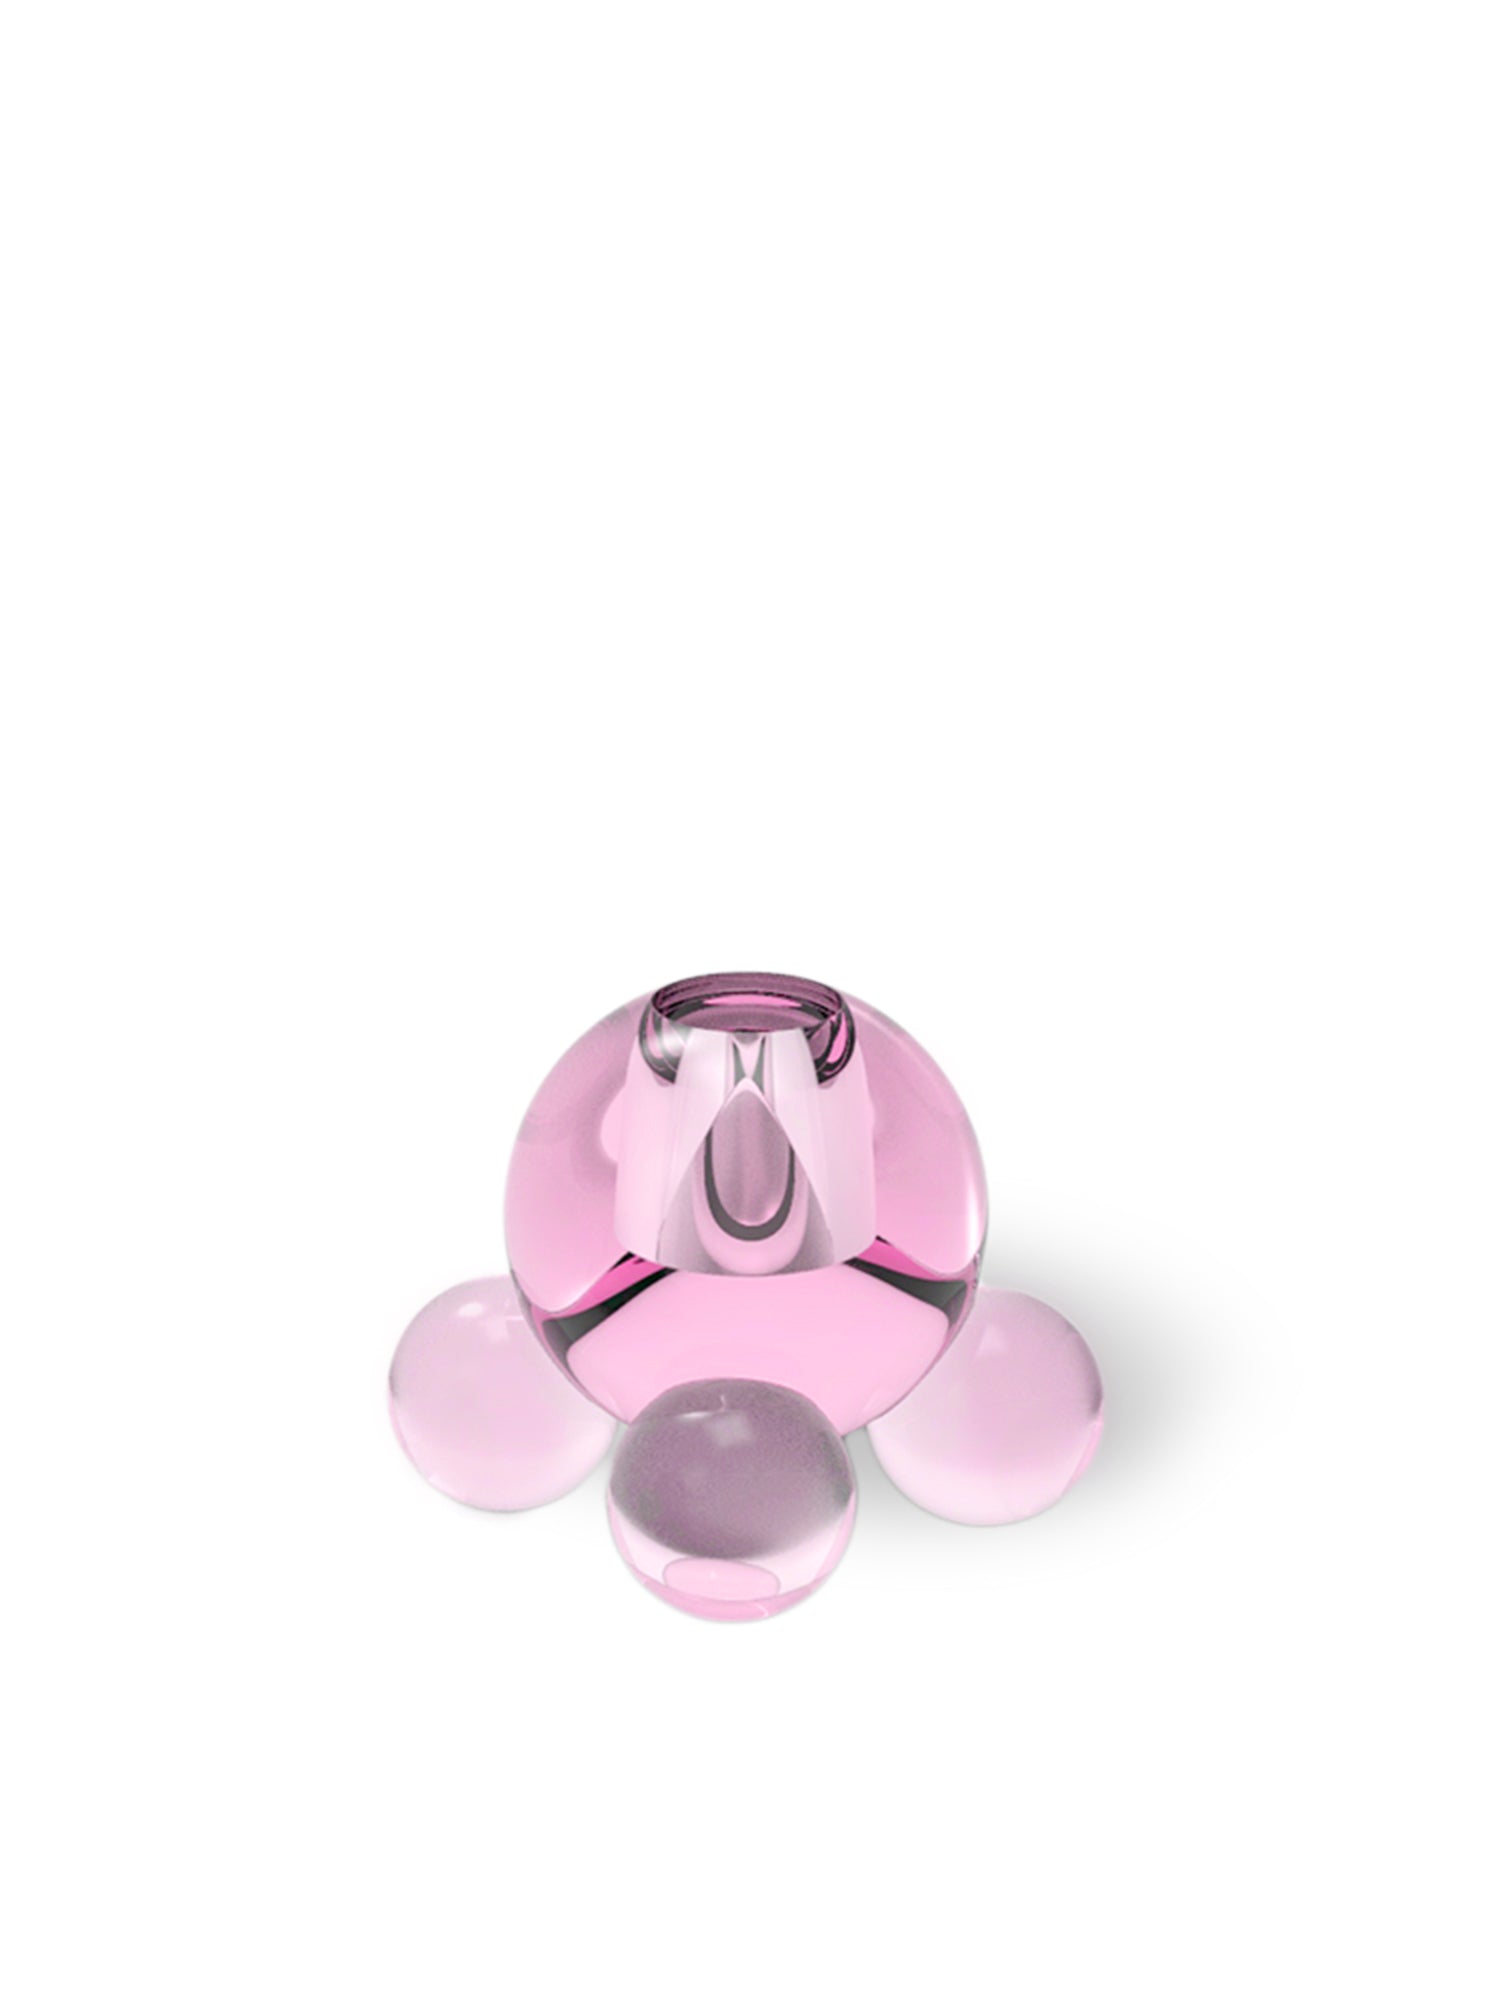 Bubble sphere candlestick pink